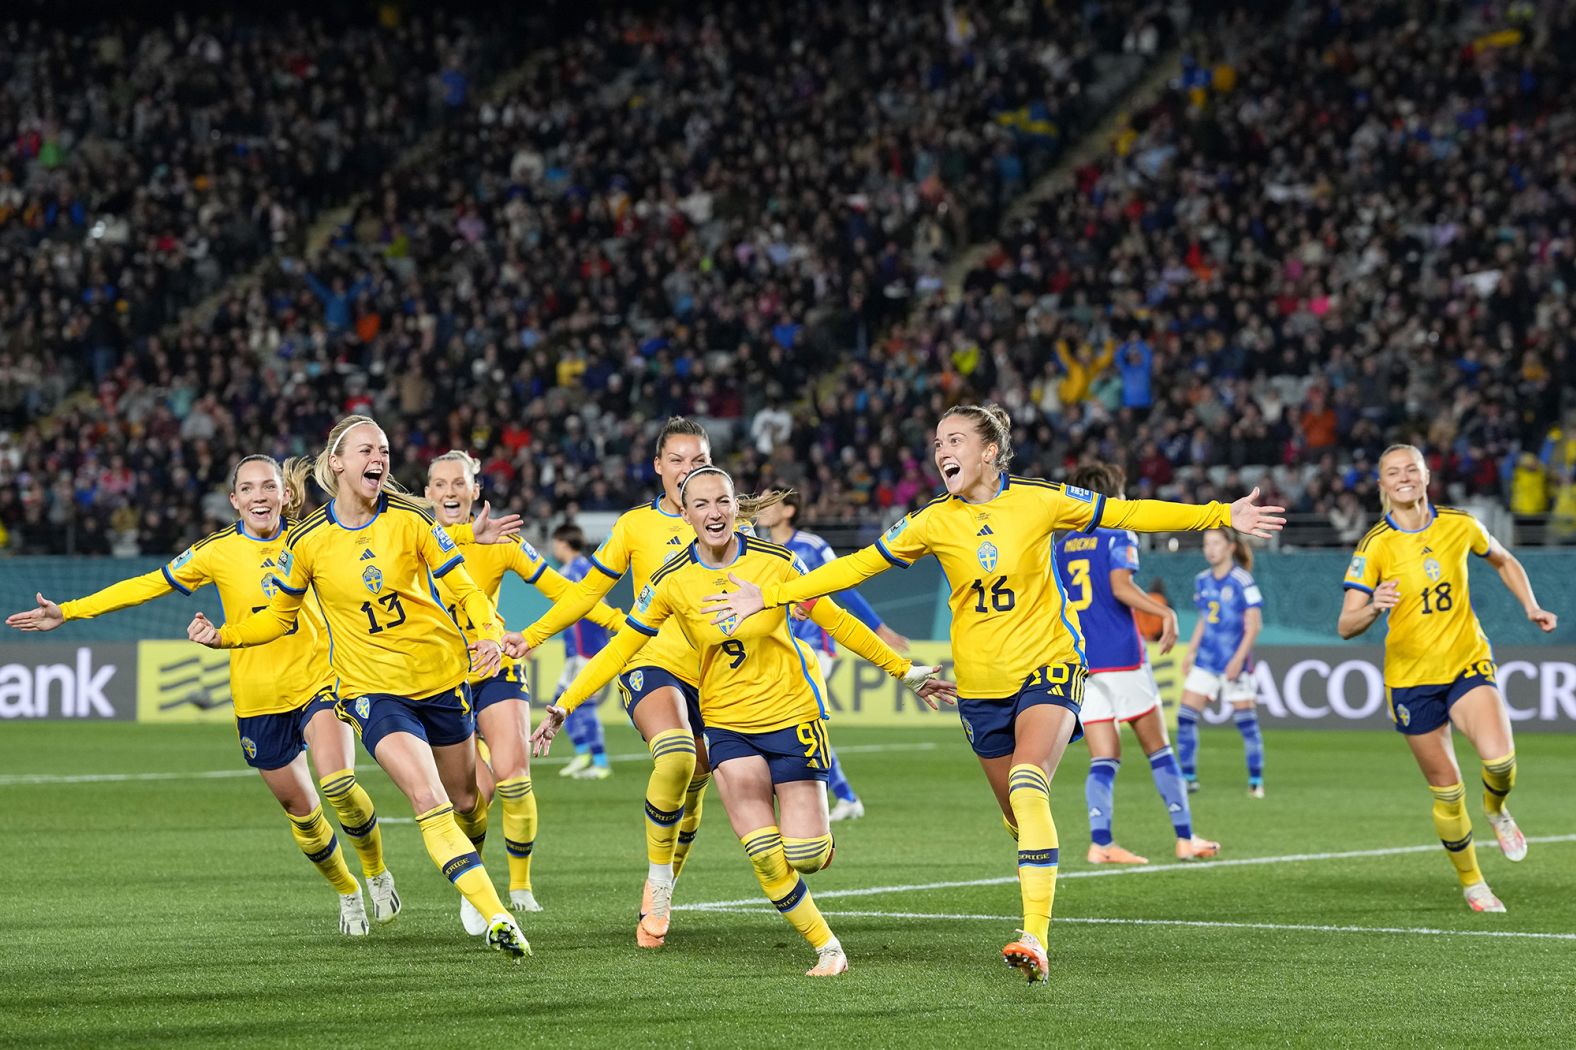 Sweden's Filippa Angeldal, second right, celebrates after scoring a penalty against Japan on Friday, August 11. <a href="https://www.cnn.com/2023/08/11/football/japan-sweden-womens-world-cup-spt-intl/index.html" target="_blank">Sweden won 2-1</a> to book a spot in the semifinals.